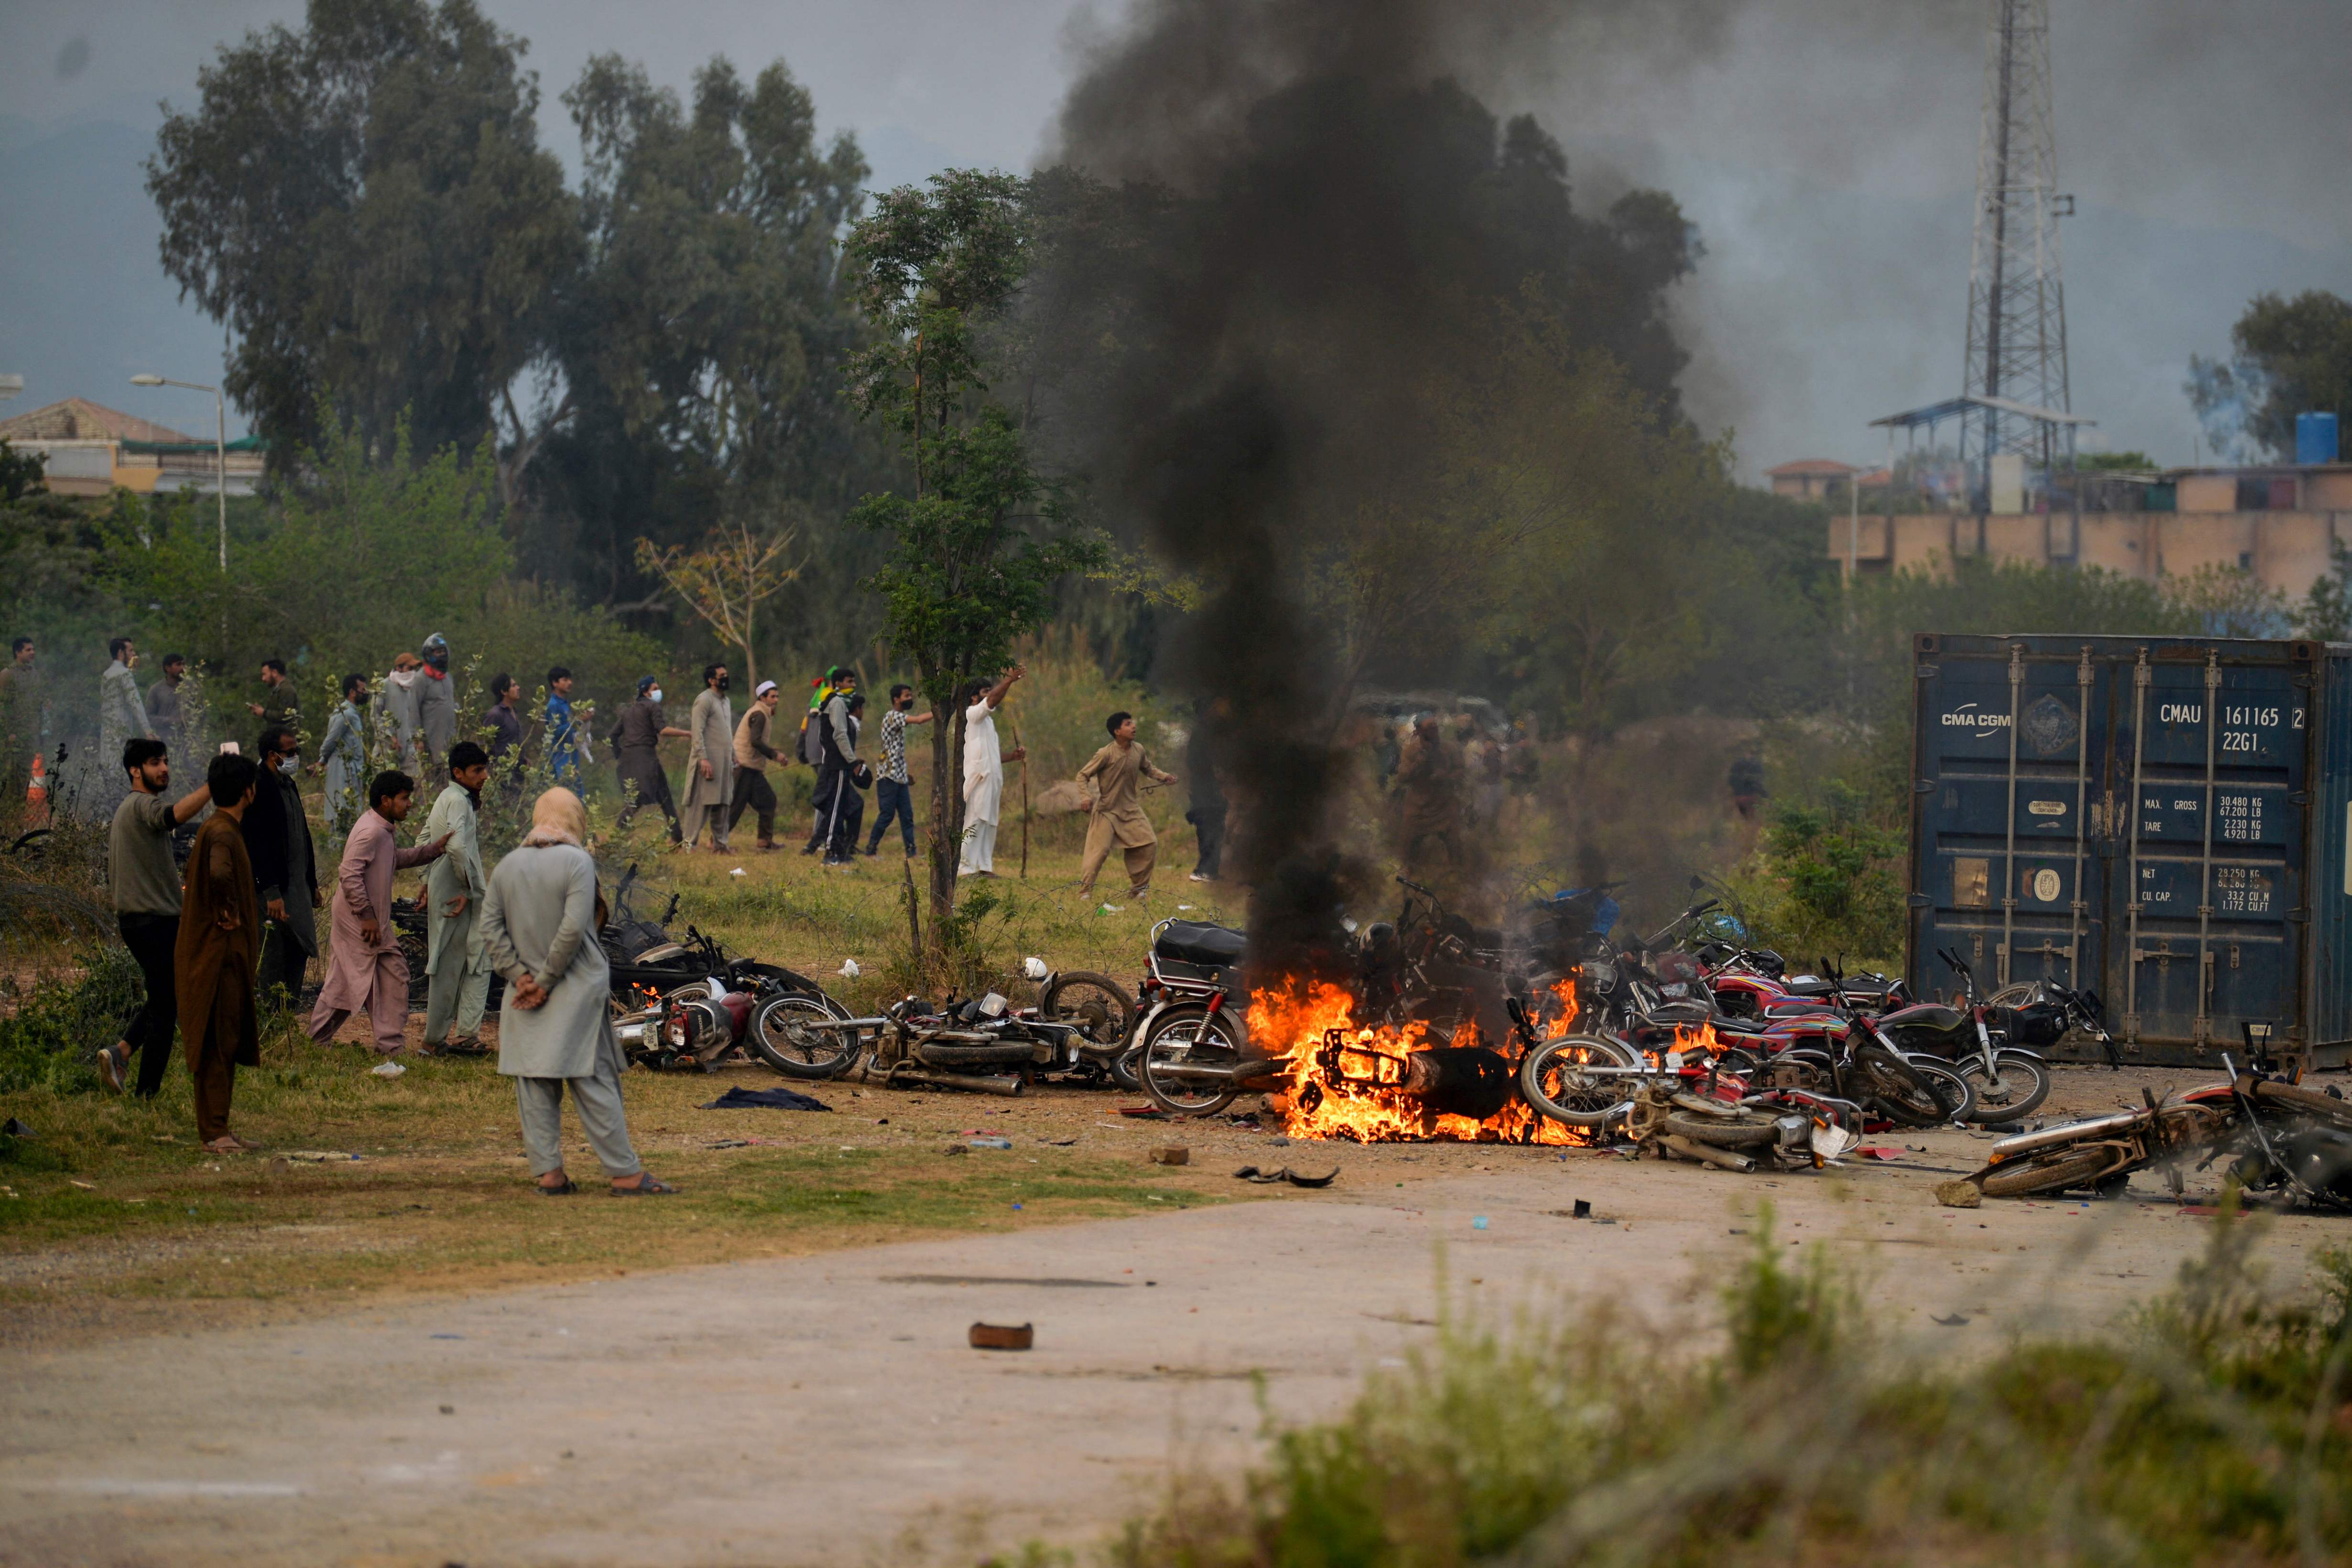 Dozens of motorcycles were also set on fire by Tehreek-e-Insaf workers — Photo: AFP